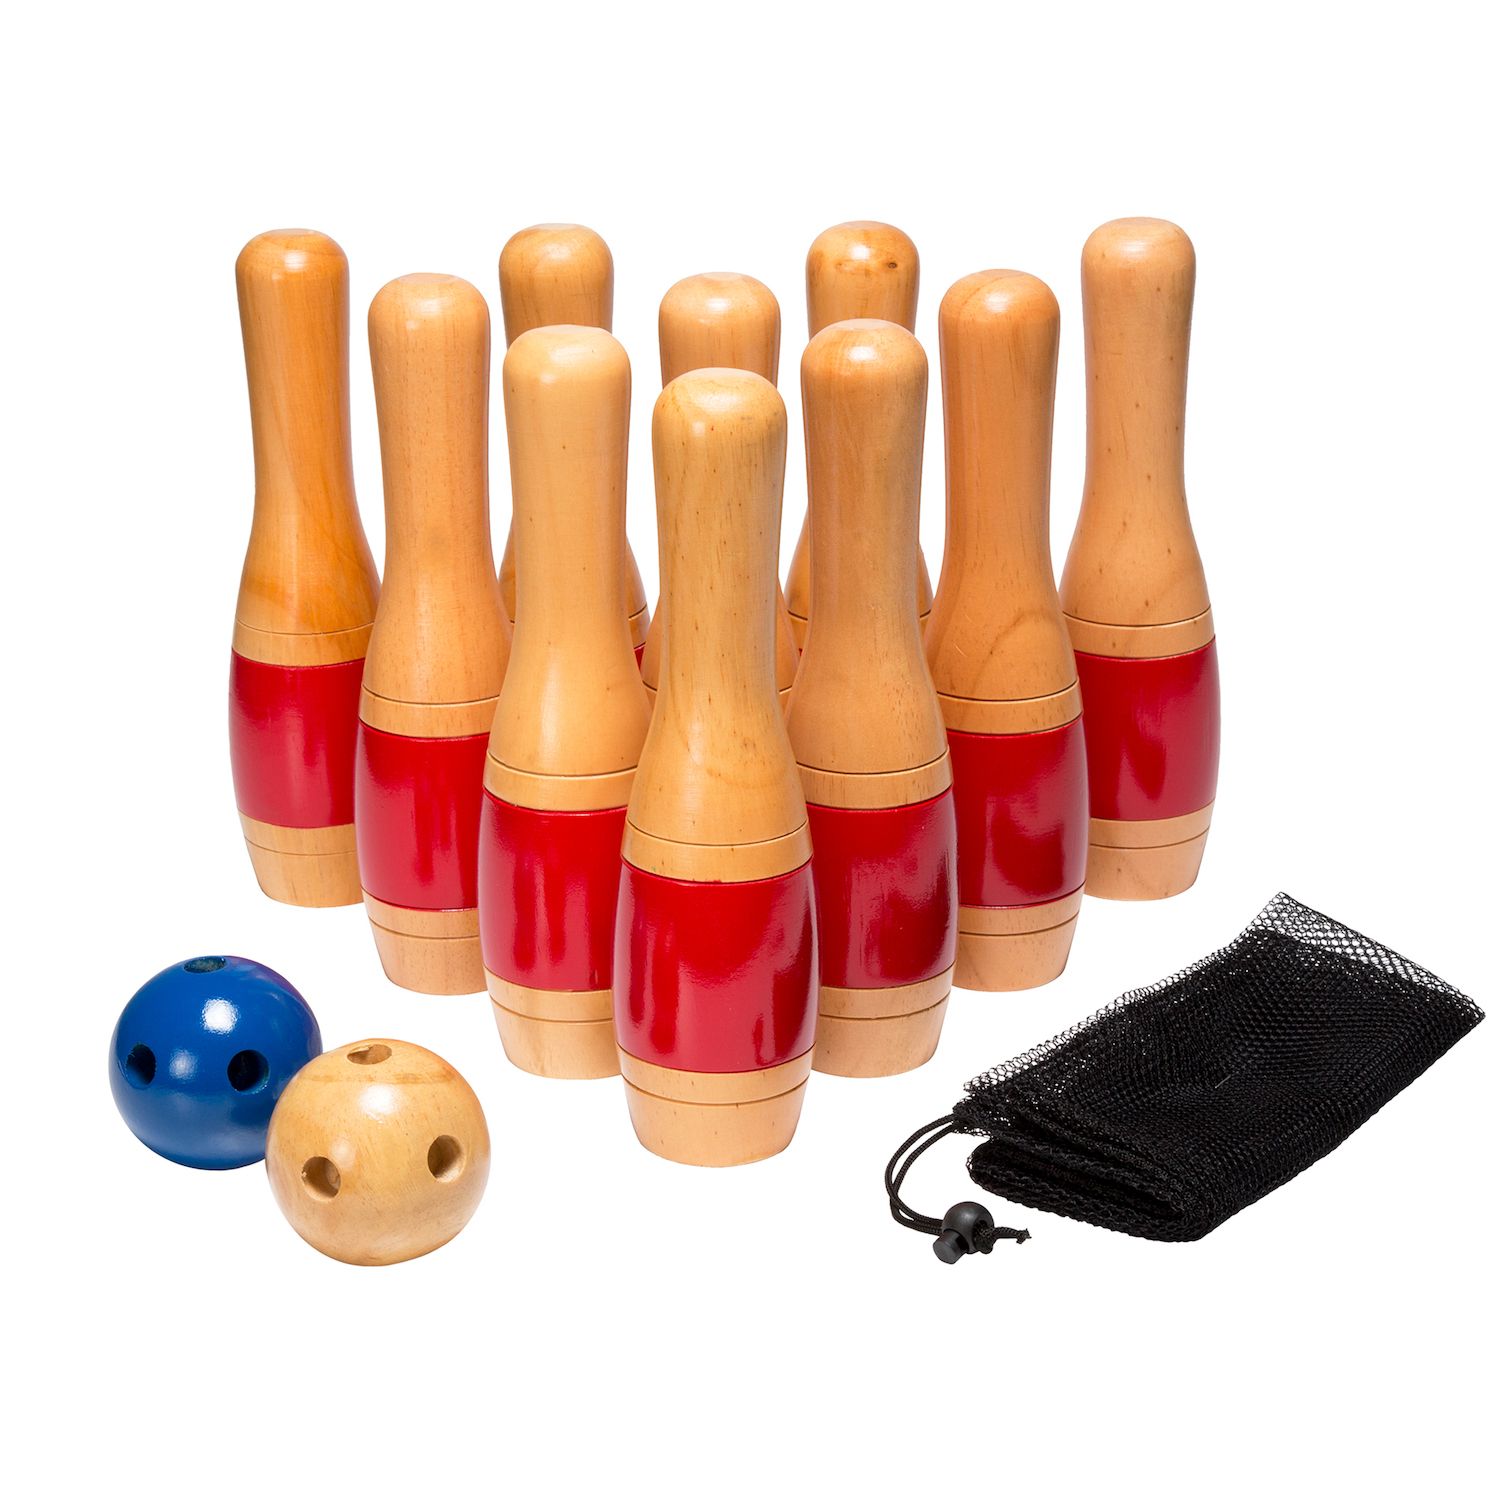 Image for Hey! Play! 11-in. Wooden Lawn Bowling Set at Kohl's.